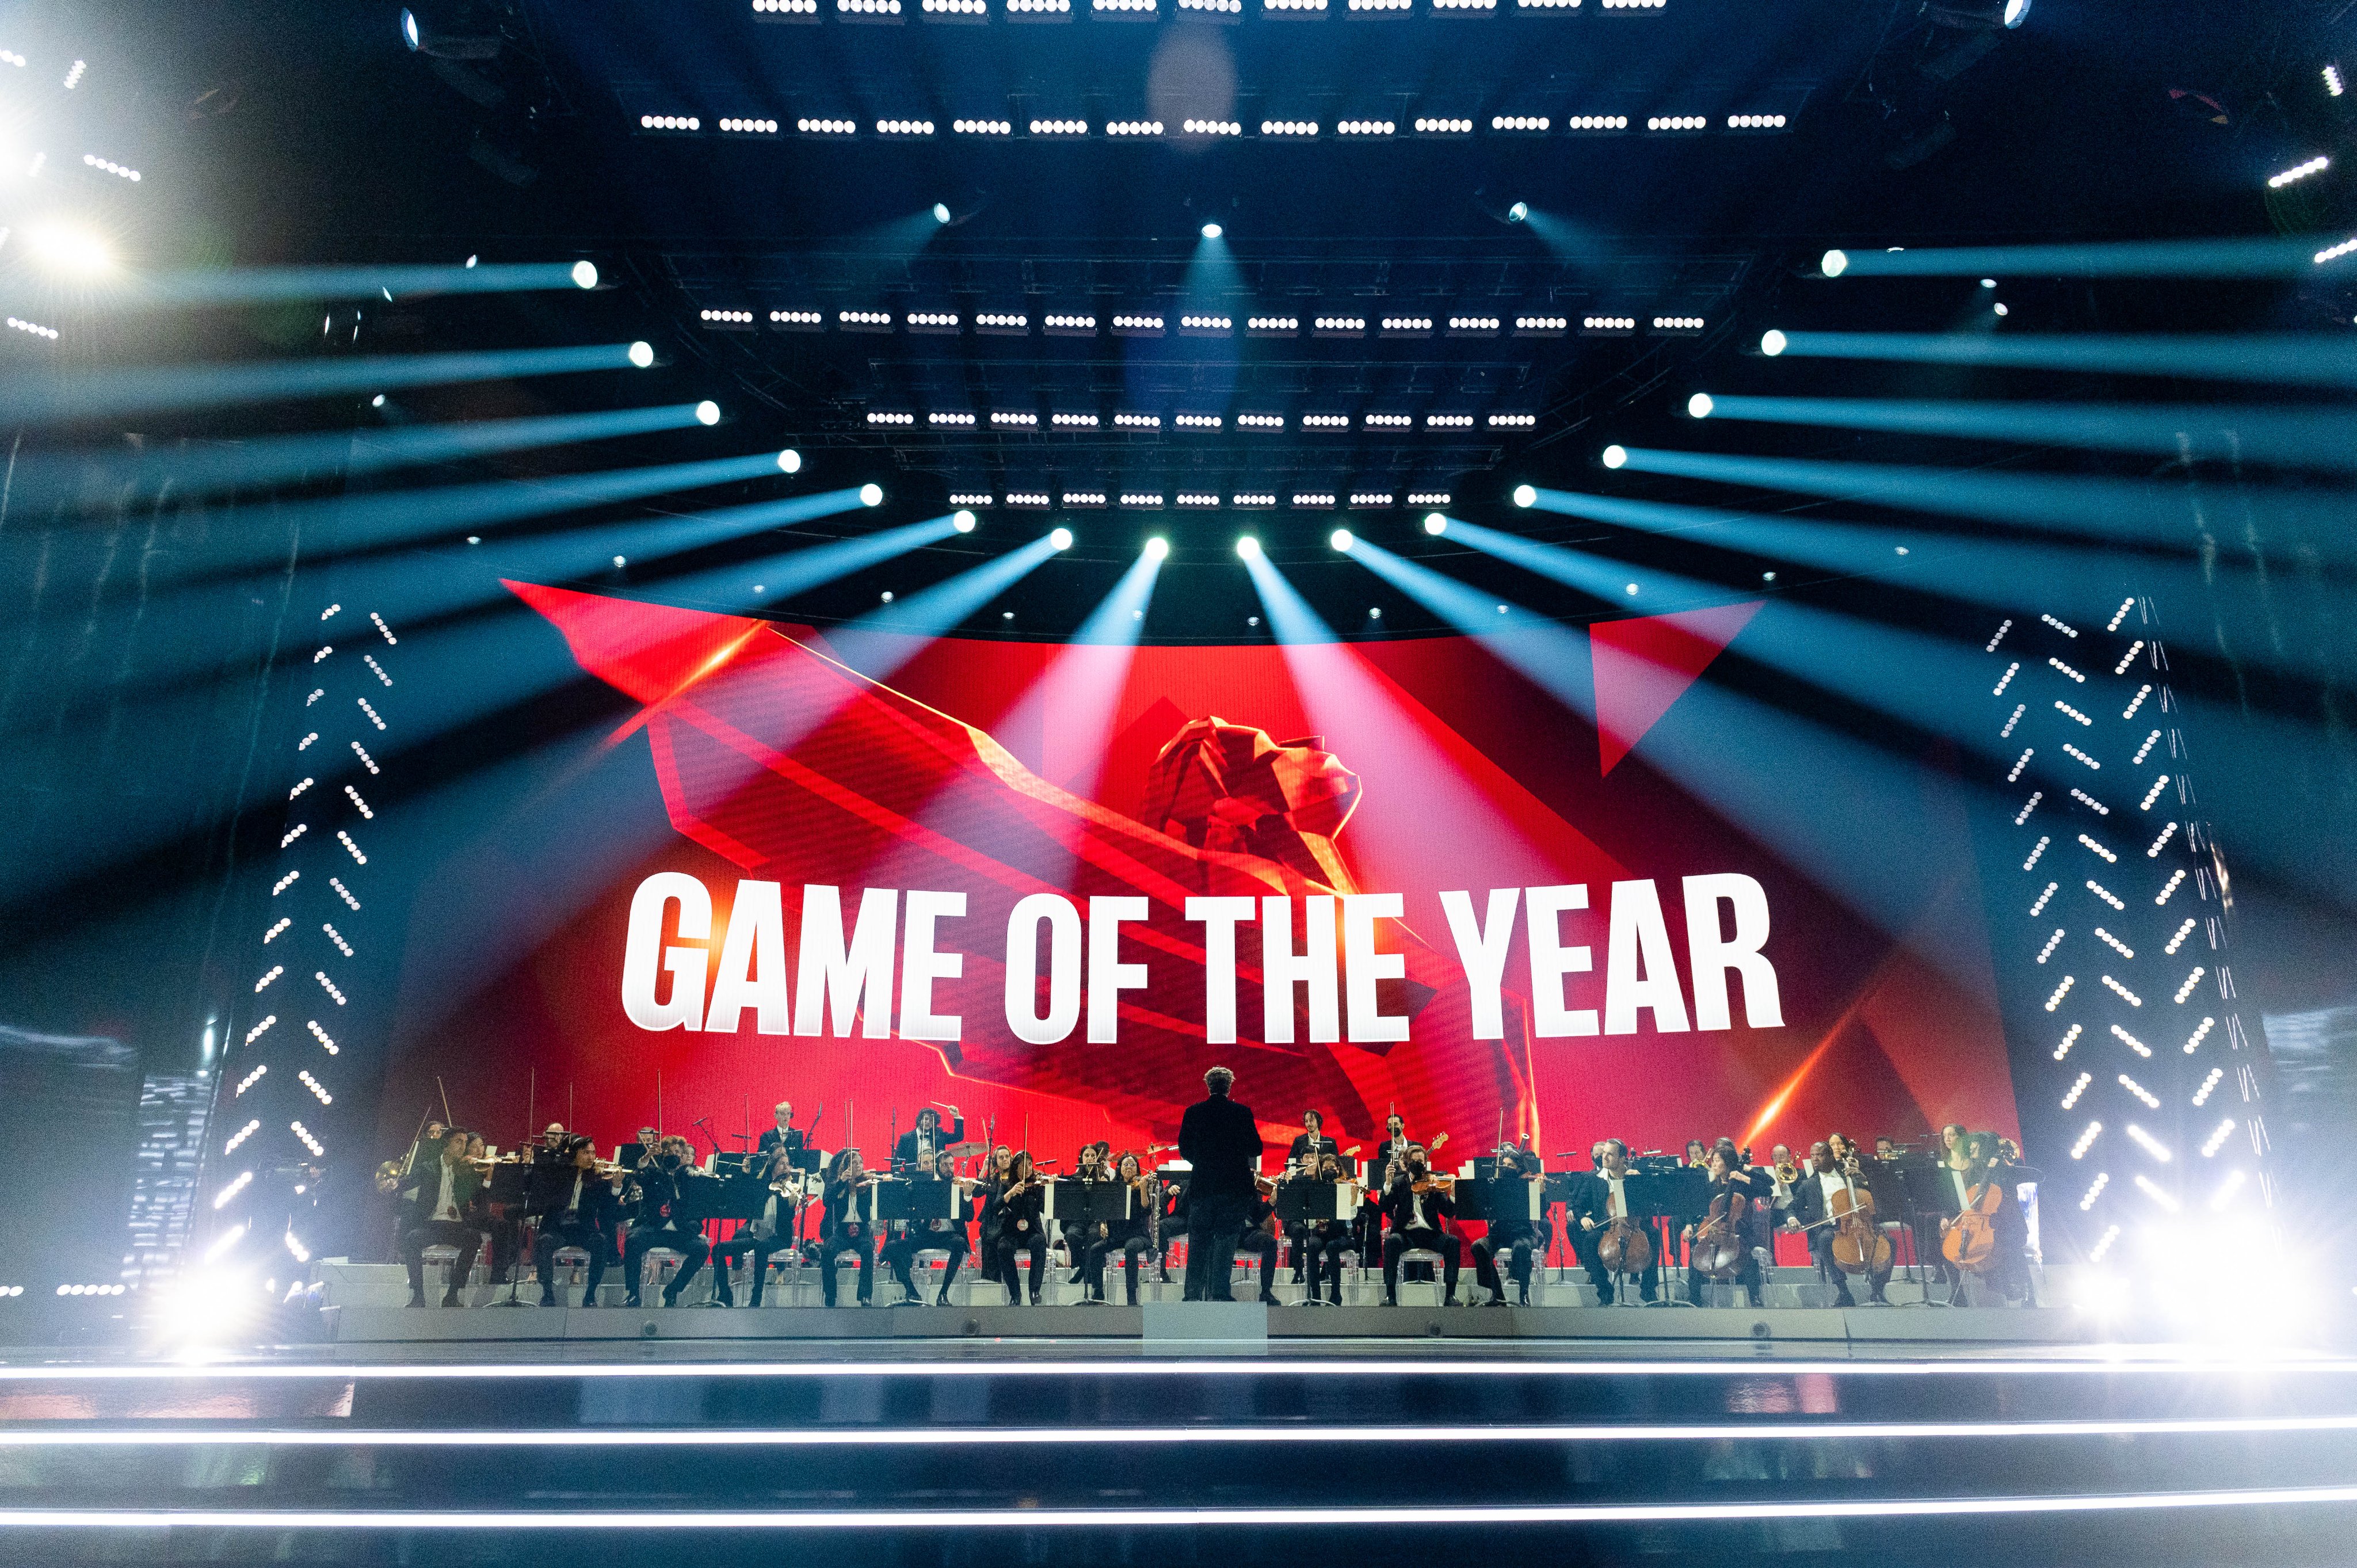 Around 40 to 50 games will be shown at The Game Awards this year